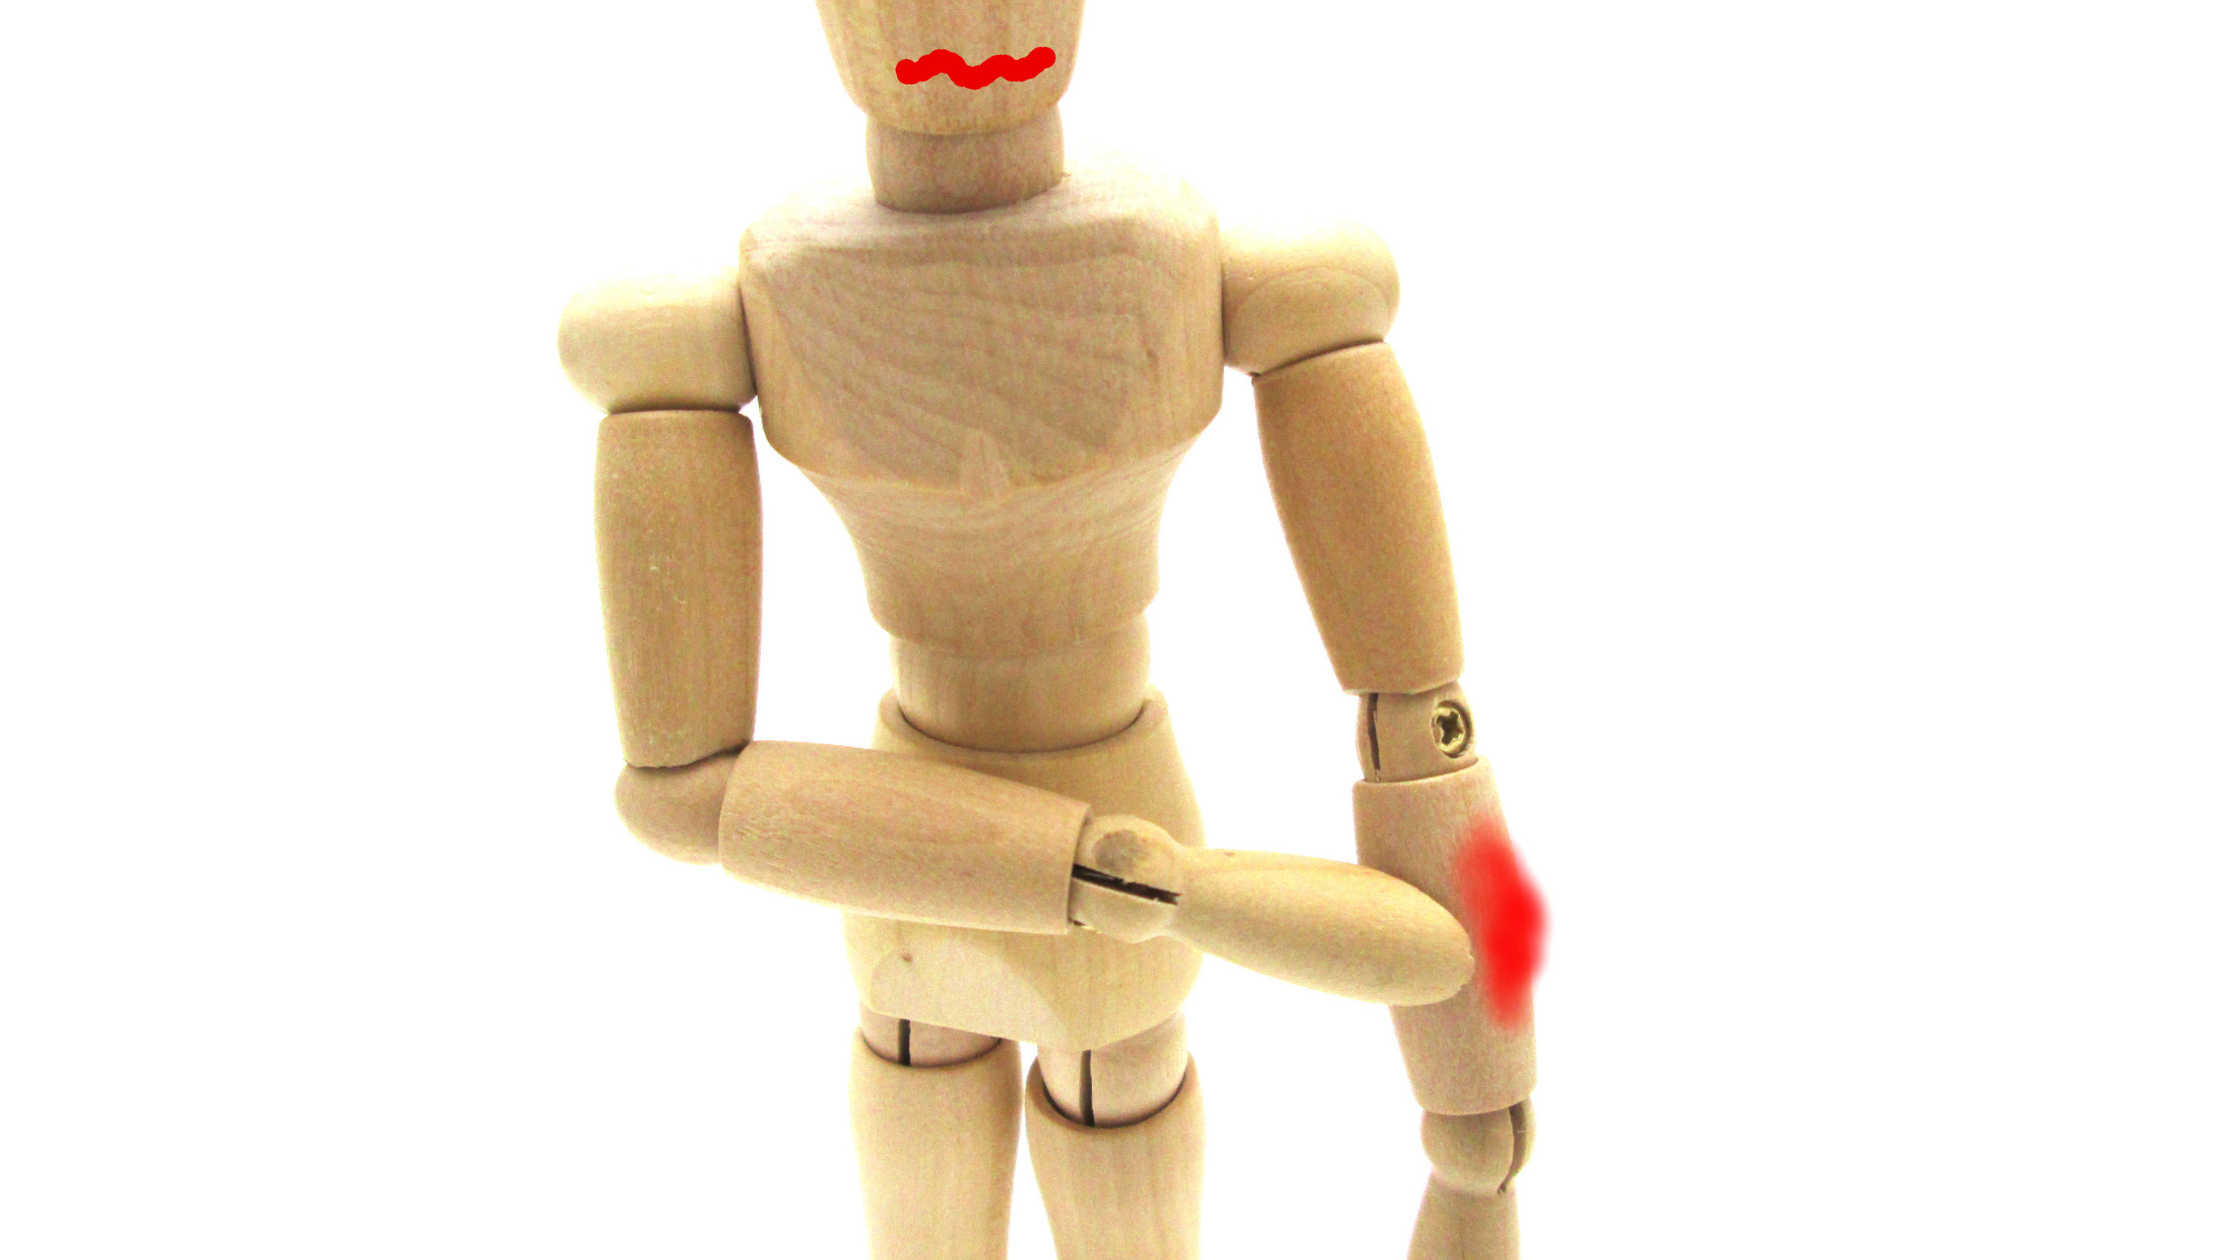 A wooden marionette with red spots indicating pain points